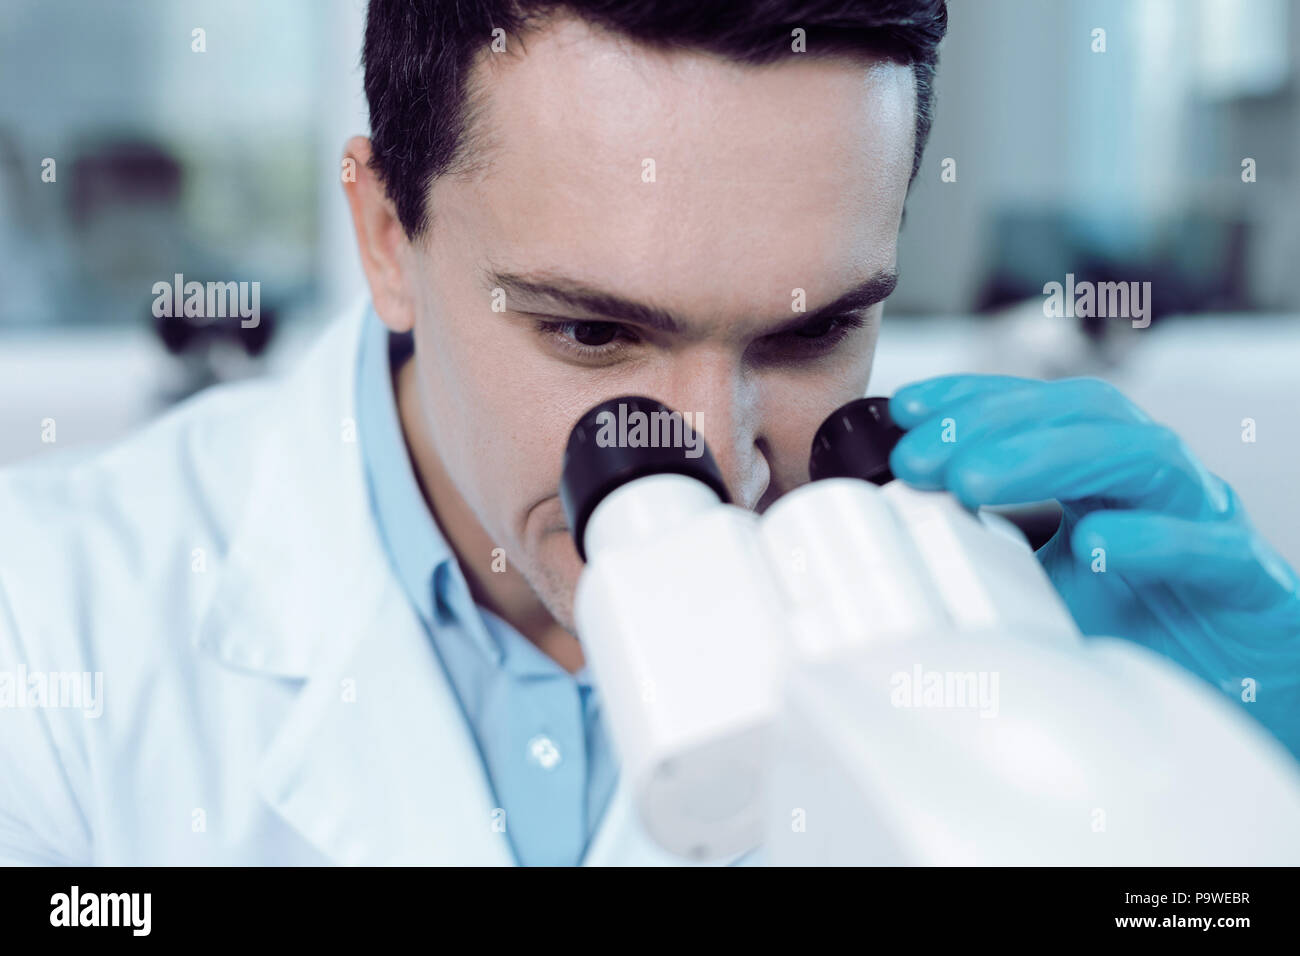 Biological studies. Cheerful positive handsome scientist holding microscope binoculars and looking into them while working on his studies Stock Photo